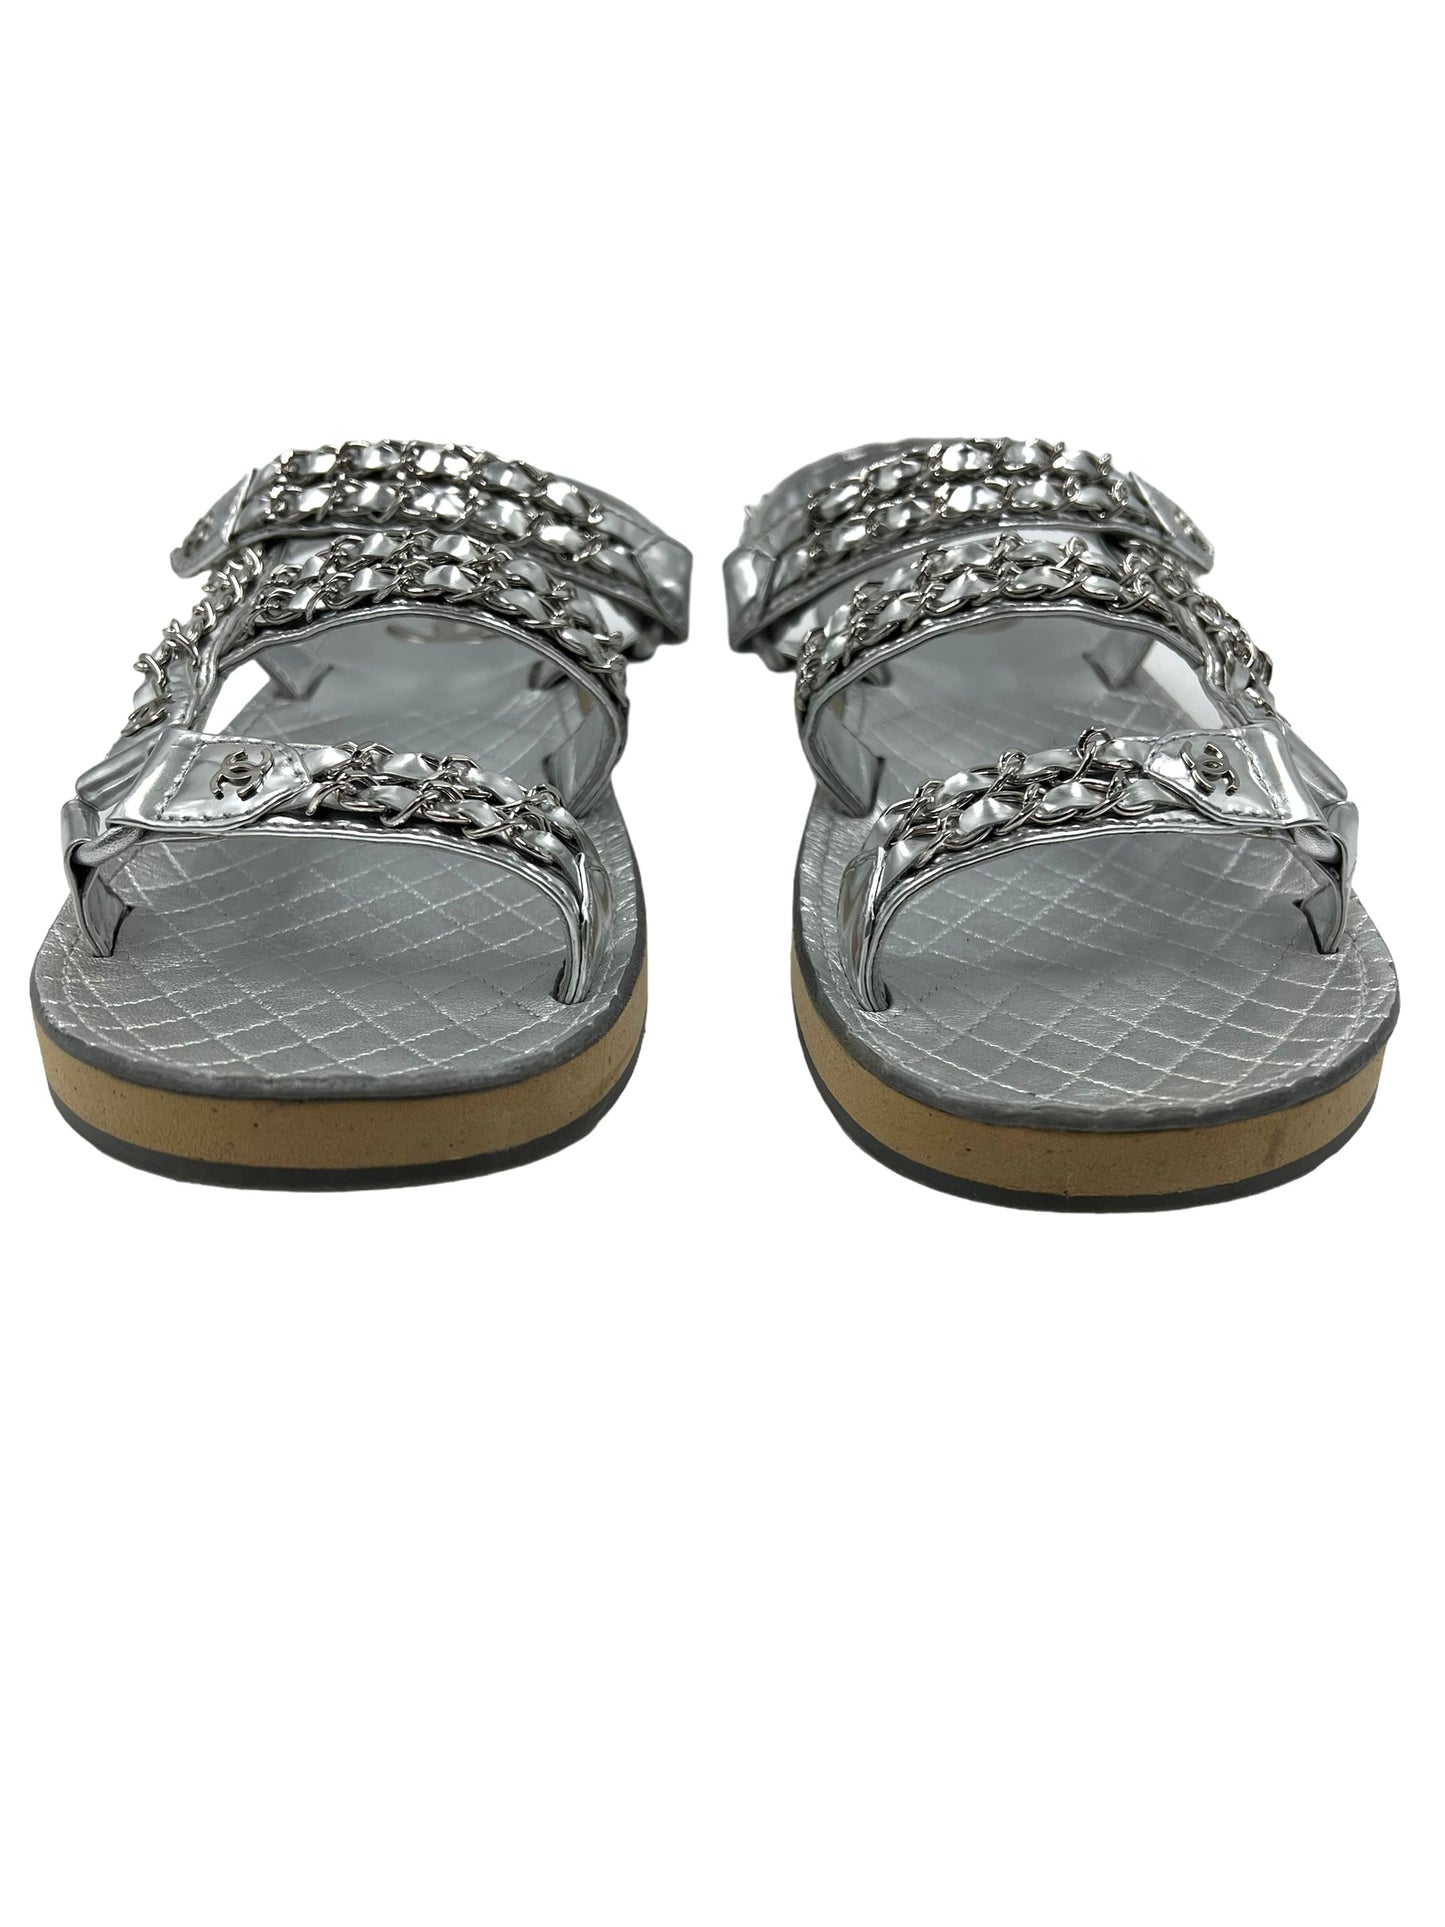 Chanel Size 39.5 Silver Leather Dad Chain Sandals